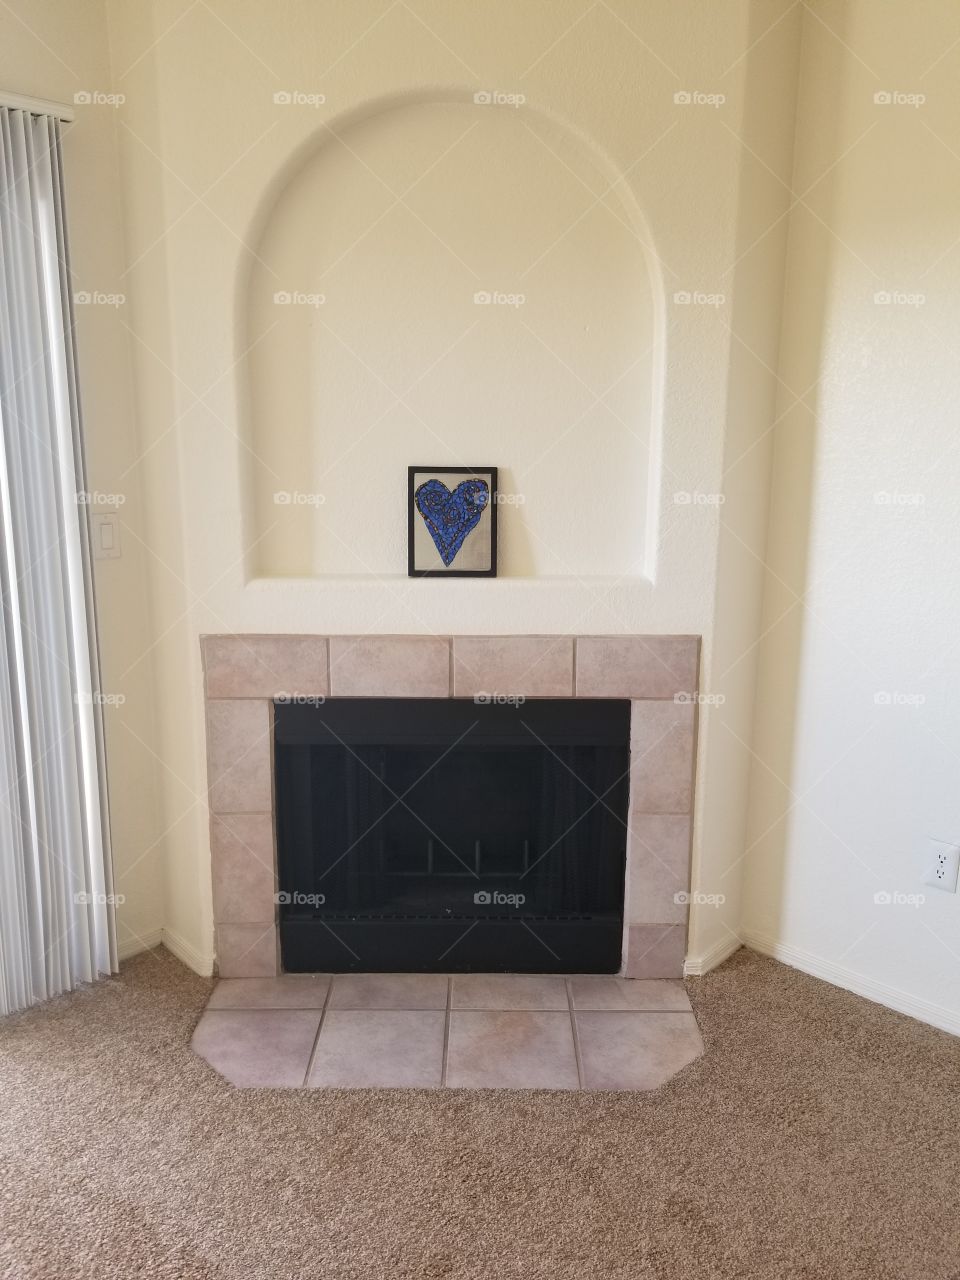 Heart mosaic on top of fireplace